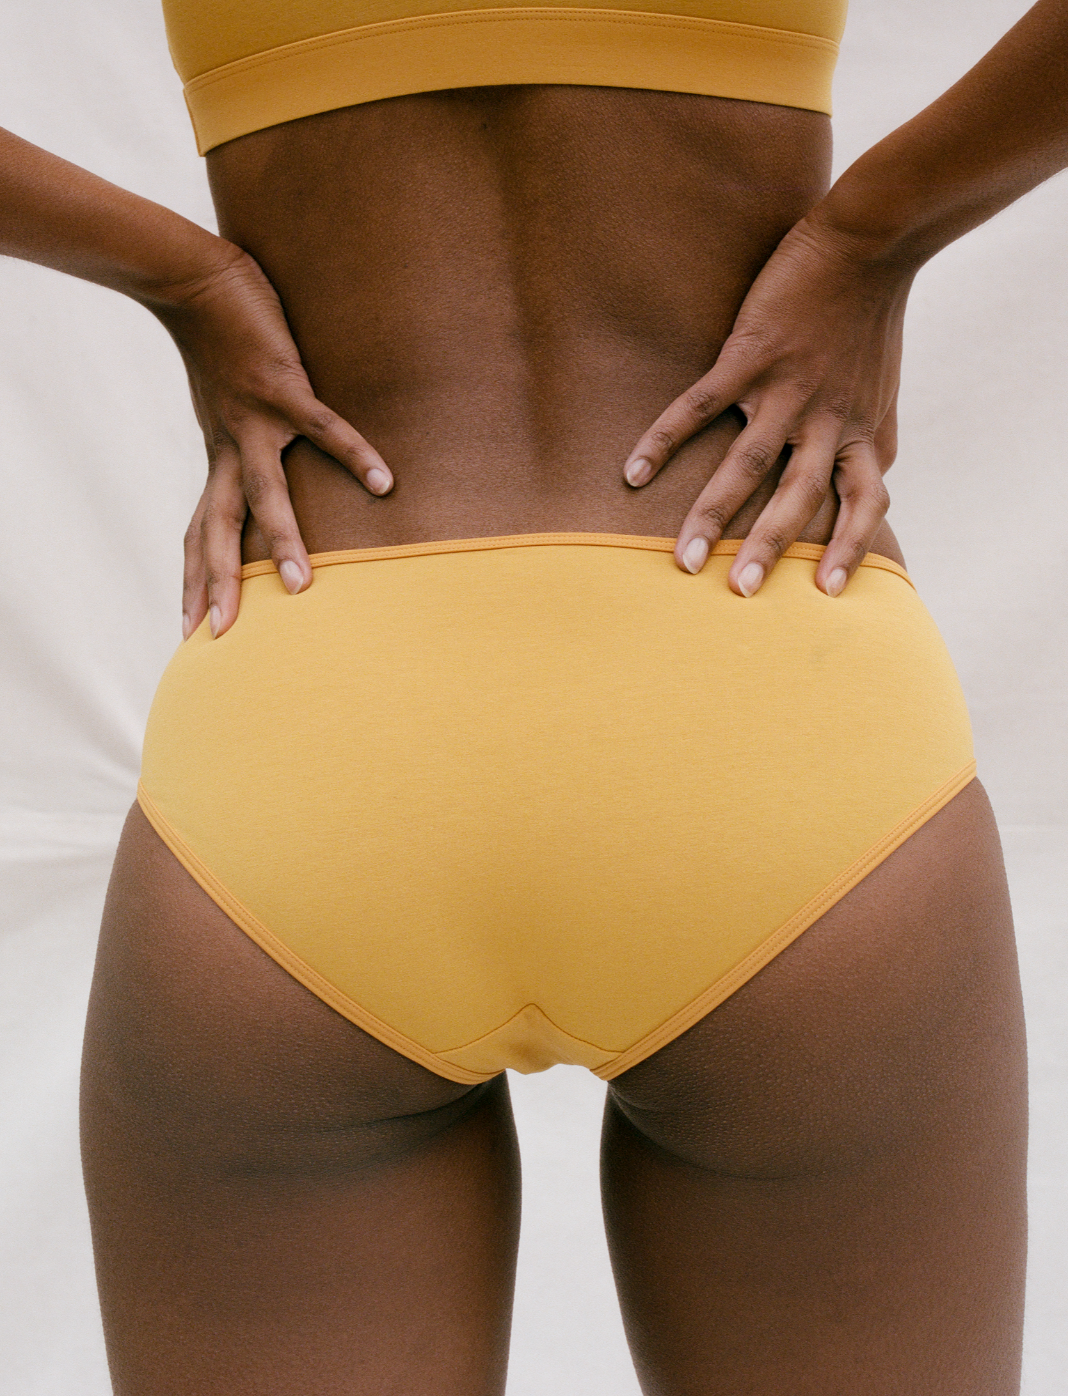 Hi guys! Kit Undergarments has joined forces with @thirdlove in